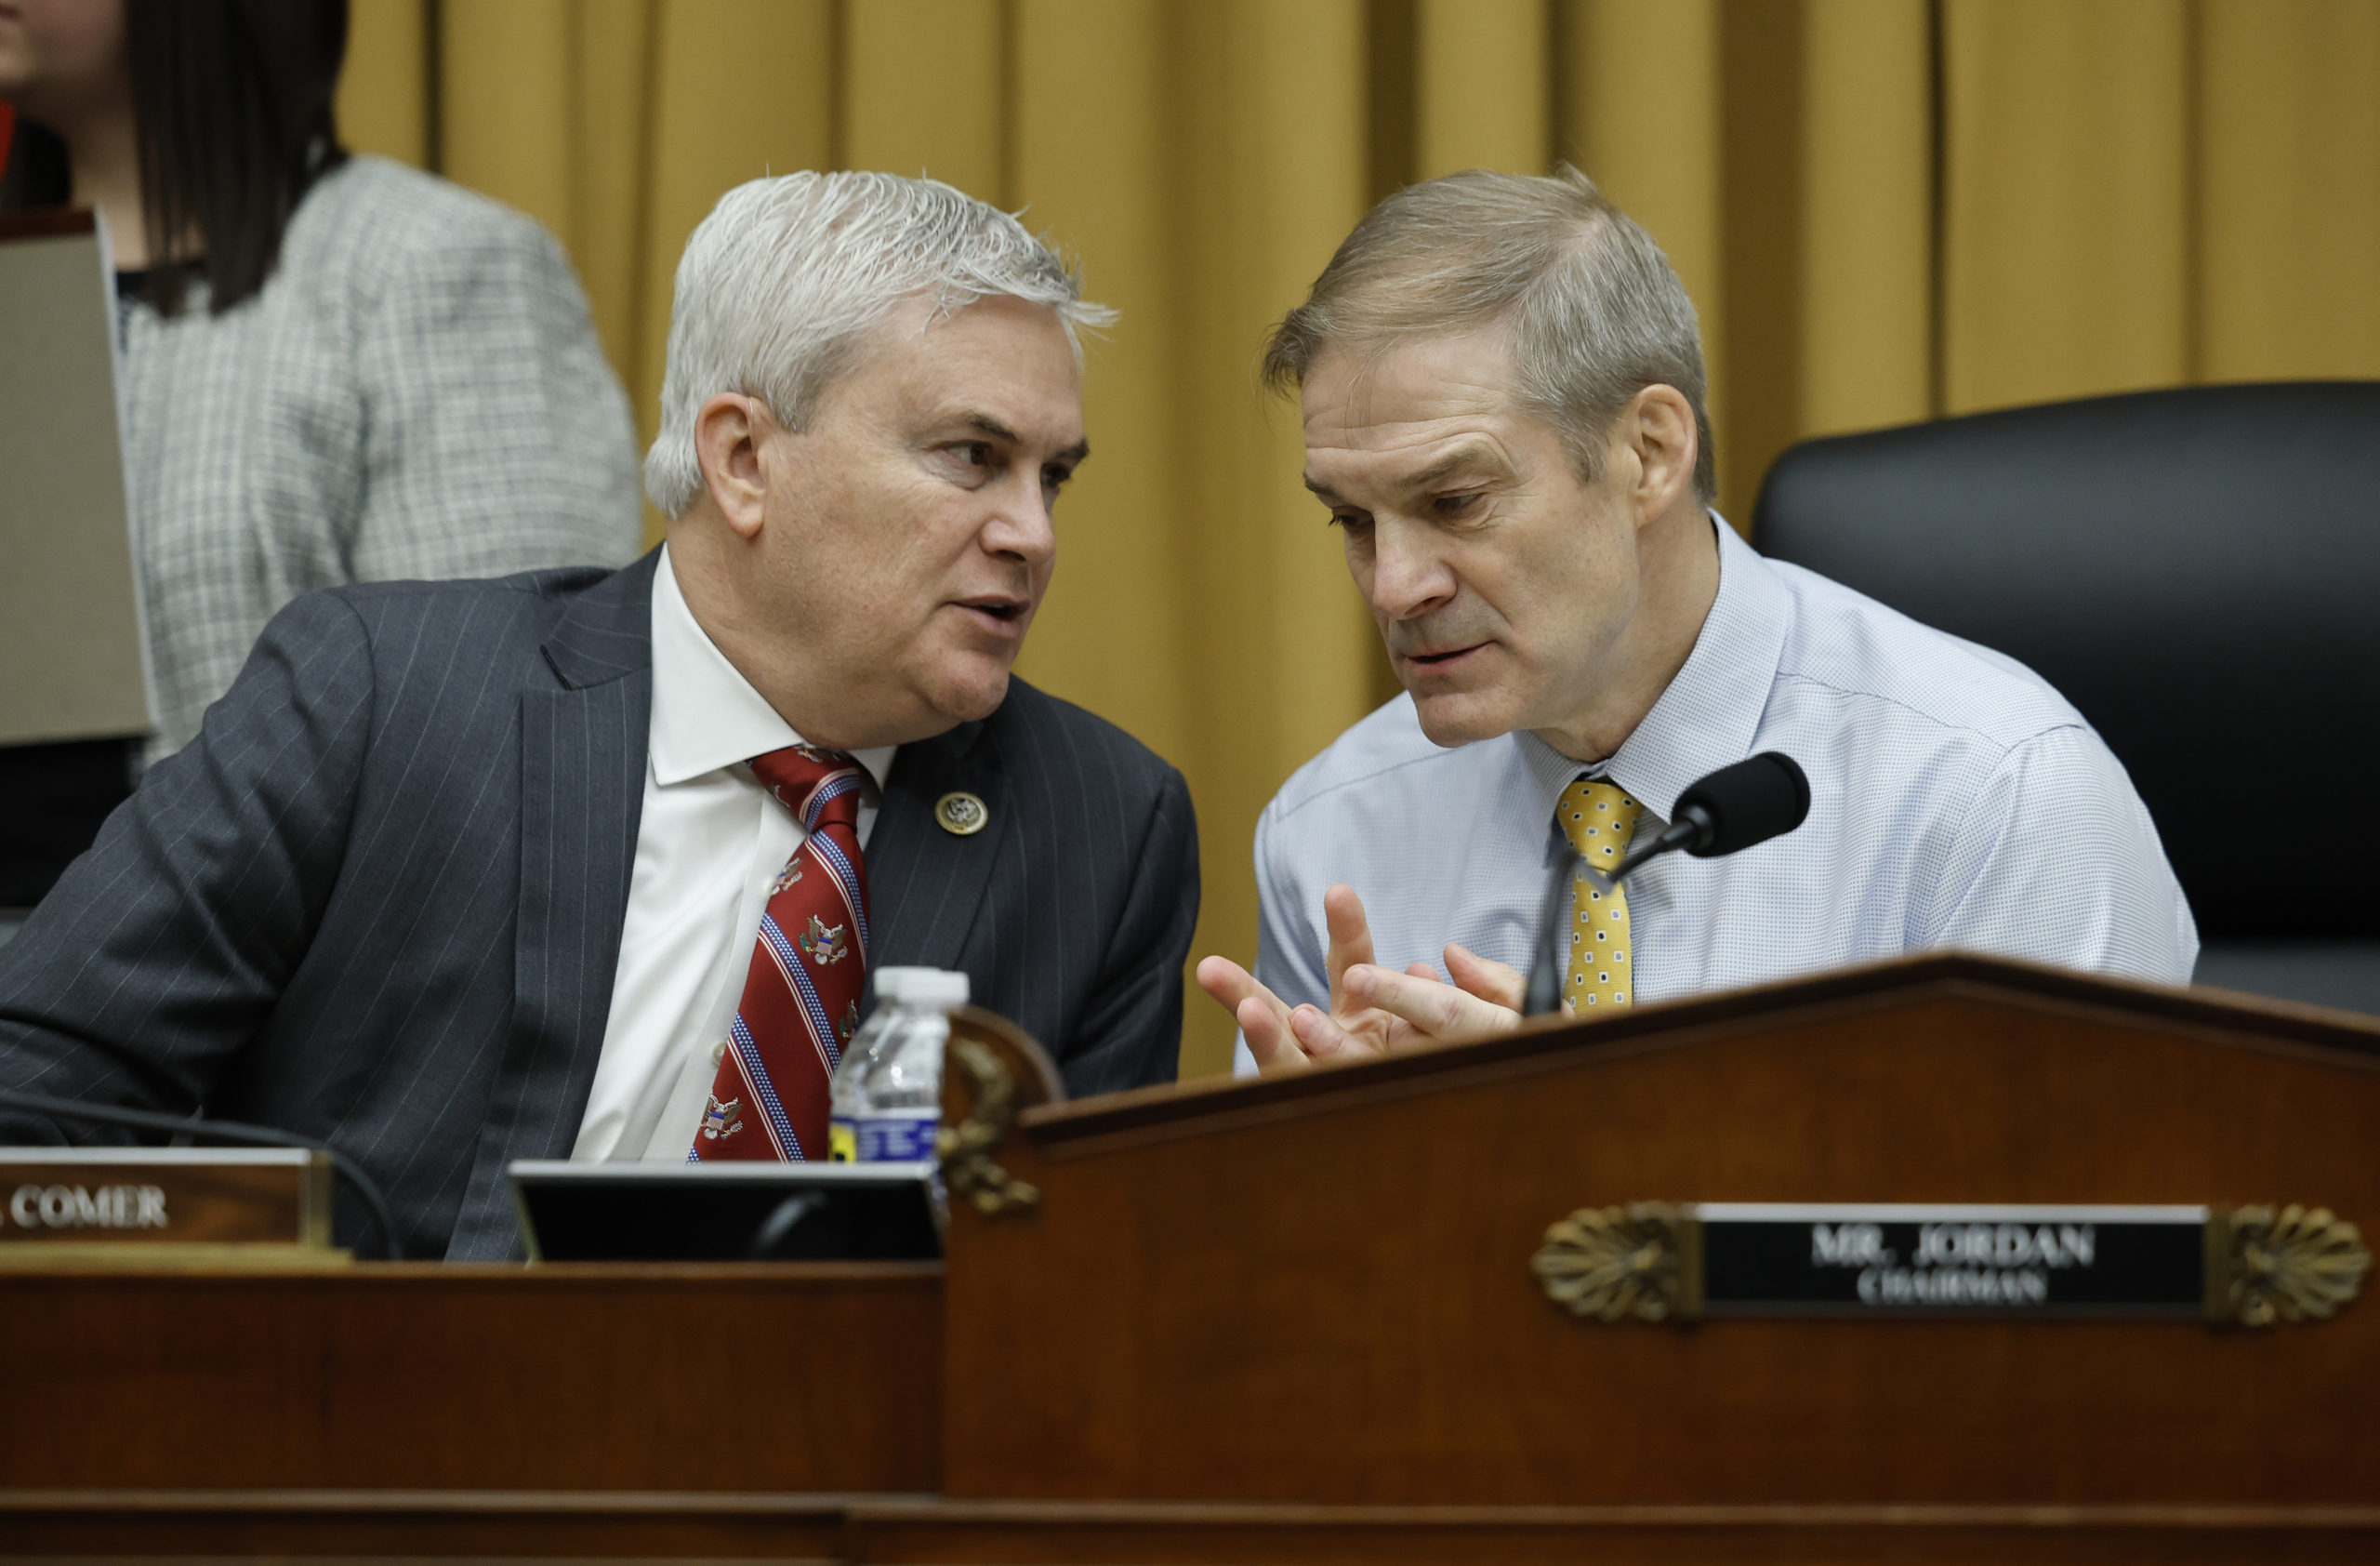 Rep. James Comer (R-KY) (L) talks to Chairman Rep. Jim Jordan (R-OH) as former Special Counsel Robert K. Hur testifies before the House Judiciary Committee on March 12, 2024 in Washington, DC. Hur investigated U.S. President Joe Biden’s mishandling of classified documents and published a final report with contentious conclusions about Biden’s memory. (Photo by Win McNamee/Getty Images)